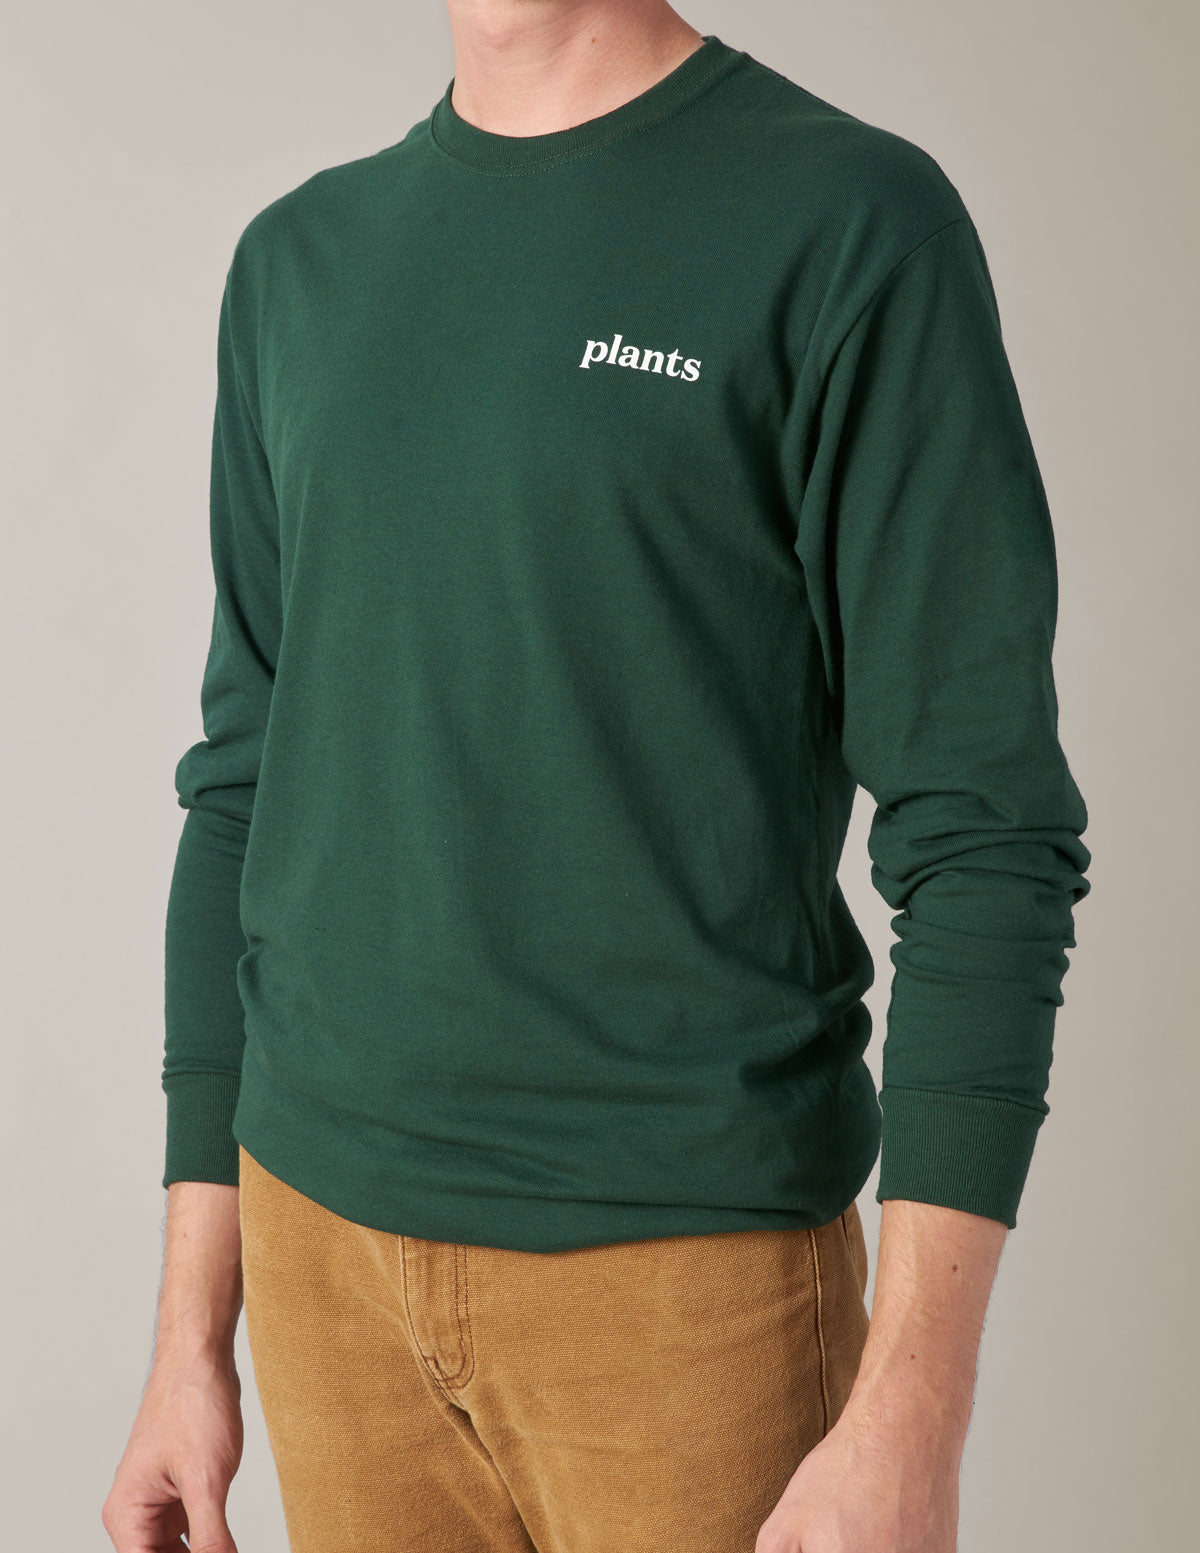 green and white long sleeve t shirt